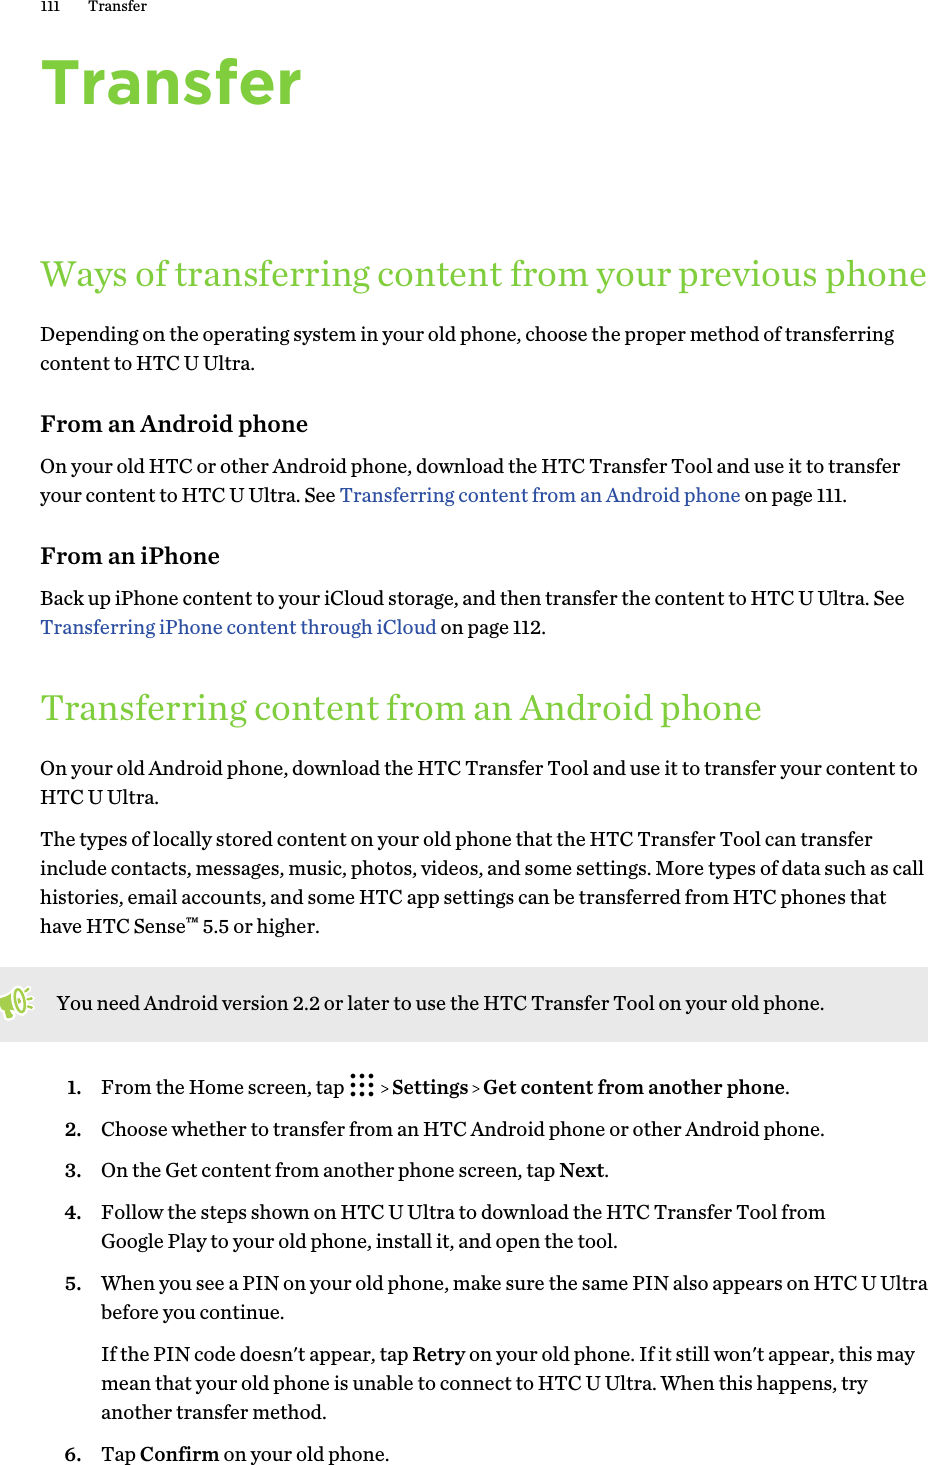 TransferWays of transferring content from your previous phoneDepending on the operating system in your old phone, choose the proper method of transferringcontent to HTC U Ultra.From an Android phoneOn your old HTC or other Android phone, download the HTC Transfer Tool and use it to transferyour content to HTC U Ultra. See Transferring content from an Android phone on page 111.From an iPhoneBack up iPhone content to your iCloud storage, and then transfer the content to HTC U Ultra. See Transferring iPhone content through iCloud on page 112.Transferring content from an Android phoneOn your old Android phone, download the HTC Transfer Tool and use it to transfer your content toHTC U Ultra.The types of locally stored content on your old phone that the HTC Transfer Tool can transferinclude contacts, messages, music, photos, videos, and some settings. More types of data such as callhistories, email accounts, and some HTC app settings can be transferred from HTC phones thathave HTC Sense™ 5.5 or higher.You need Android version 2.2 or later to use the HTC Transfer Tool on your old phone.1. From the Home screen, tap     Settings   Get content from another phone.2. Choose whether to transfer from an HTC Android phone or other Android phone.3. On the Get content from another phone screen, tap Next.4. Follow the steps shown on HTC U Ultra to download the HTC Transfer Tool fromGoogle Play to your old phone, install it, and open the tool.5. When you see a PIN on your old phone, make sure the same PIN also appears on HTC U Ultrabefore you continue. If the PIN code doesn&apos;t appear, tap Retry on your old phone. If it still won&apos;t appear, this maymean that your old phone is unable to connect to HTC U Ultra. When this happens, tryanother transfer method.6. Tap Confirm on your old phone.111 Transfer